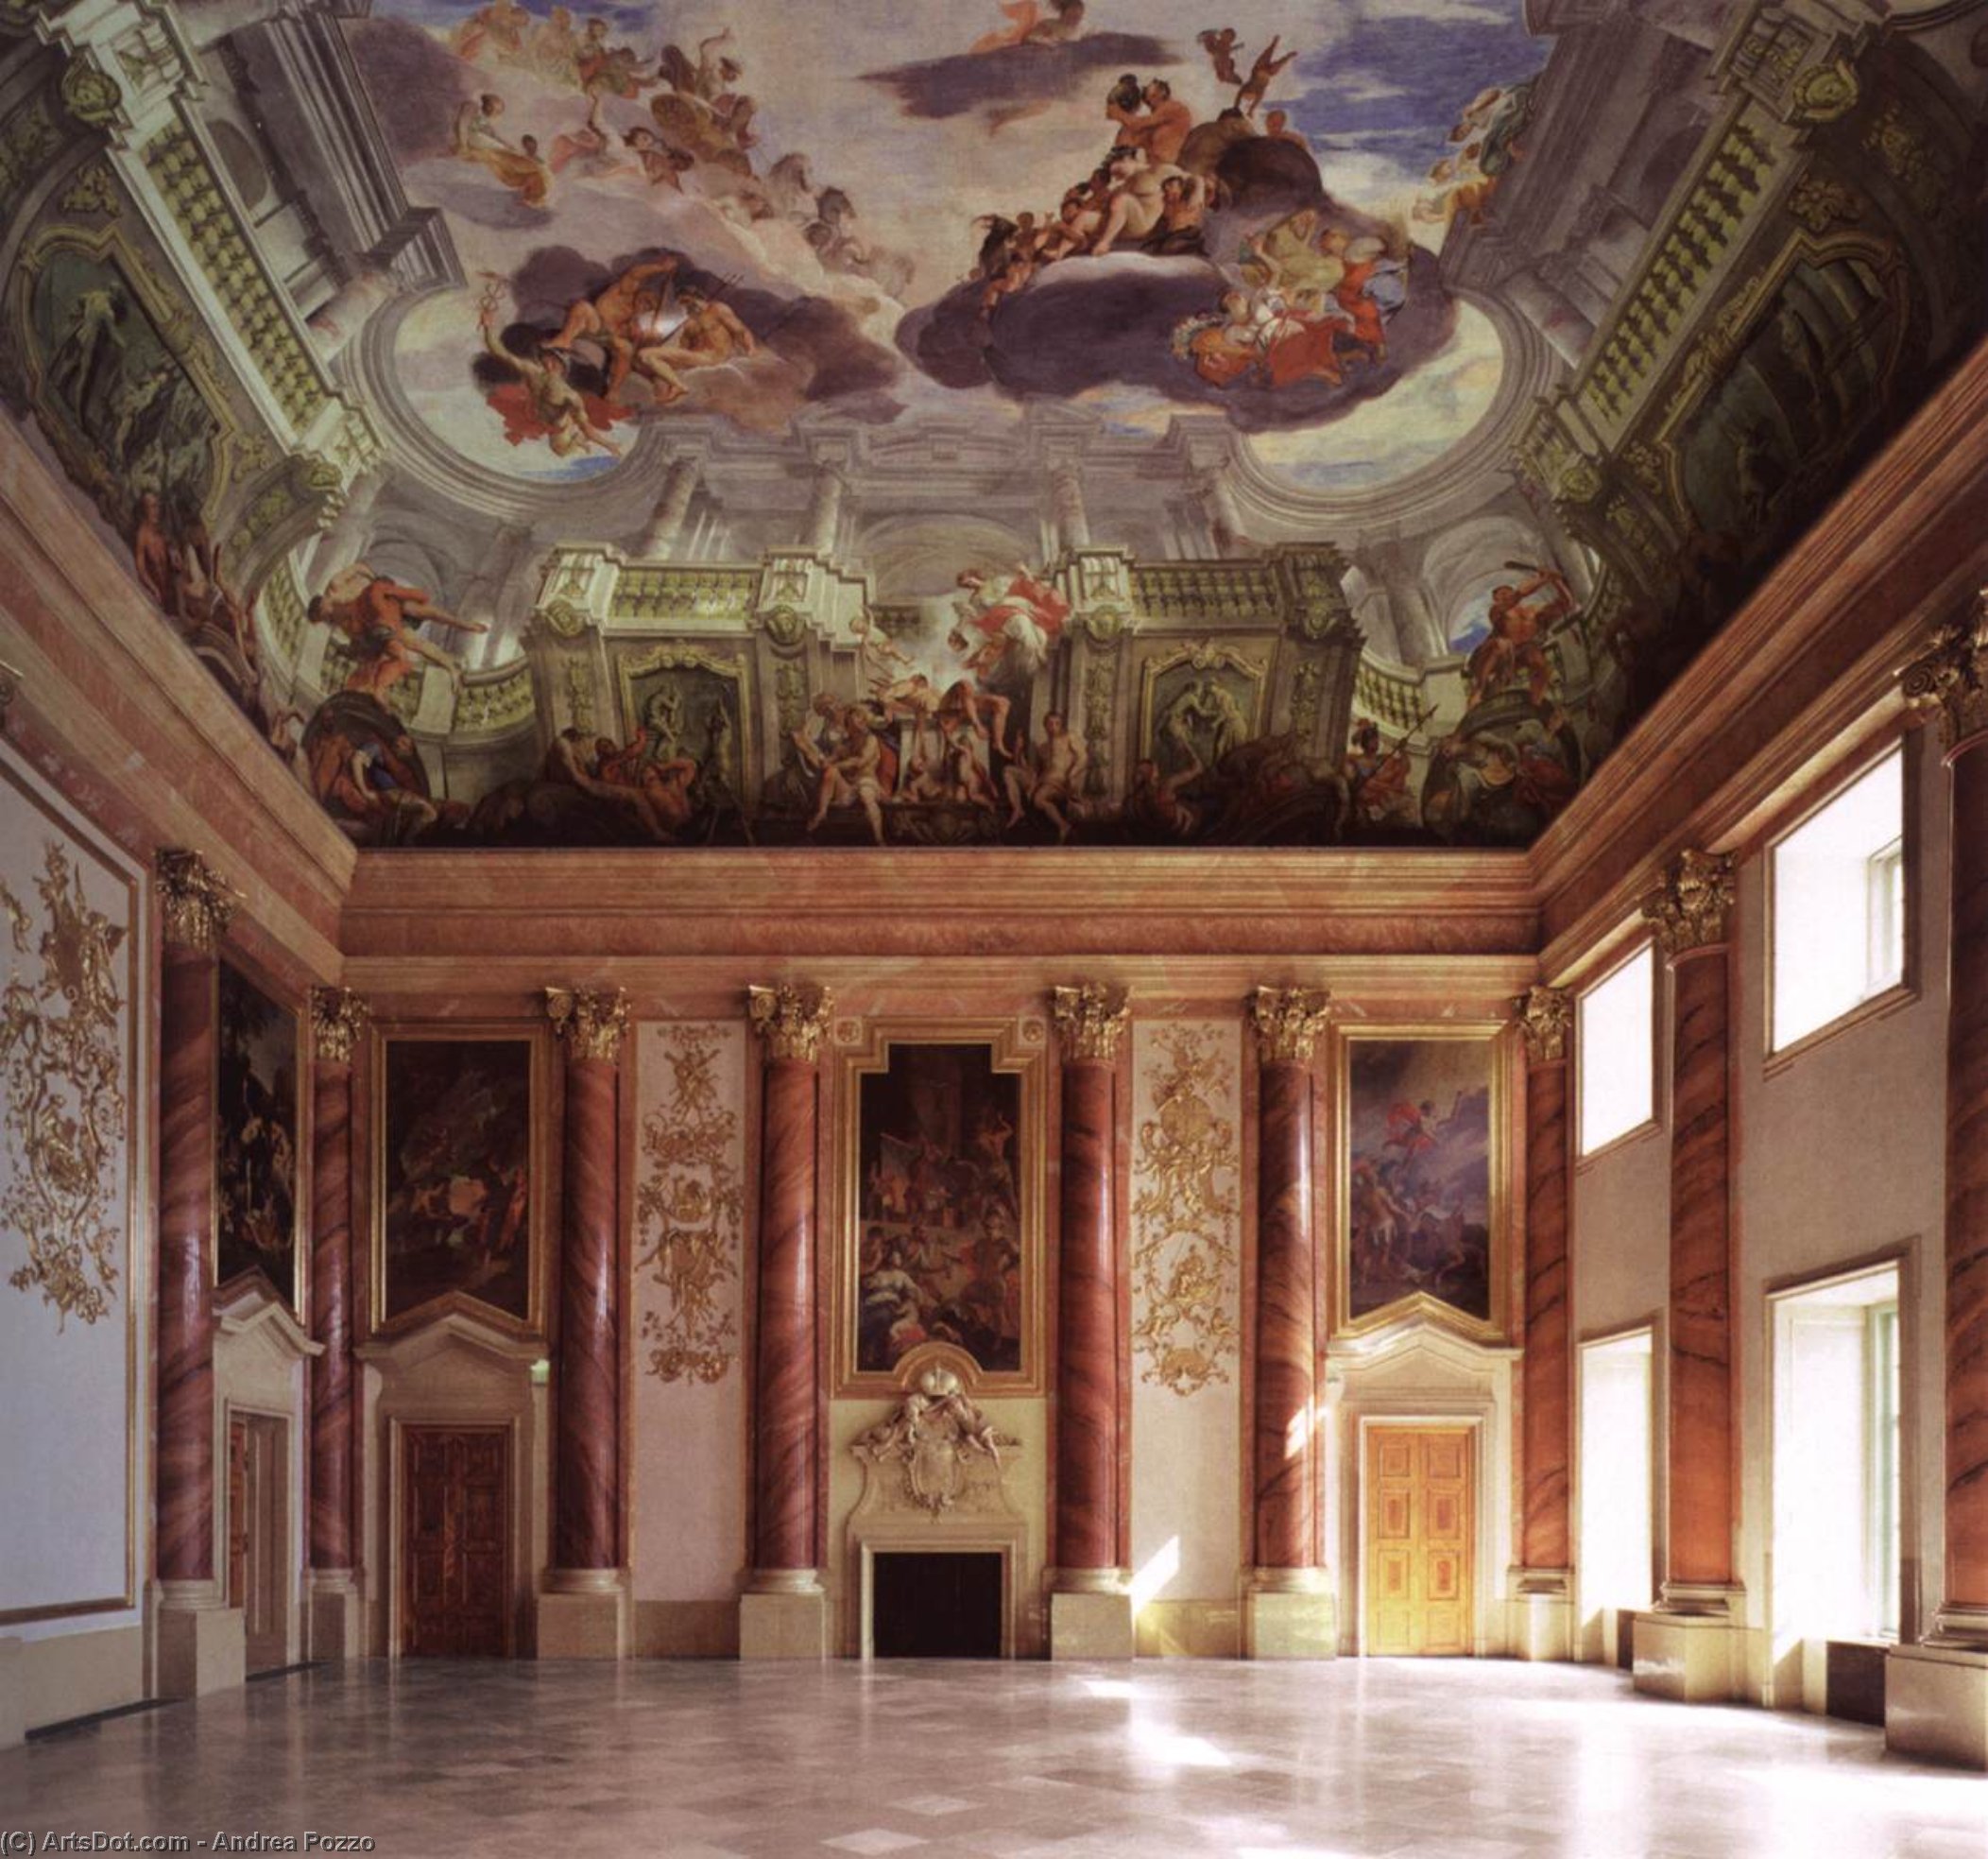 WikiOO.org - 백과 사전 - 회화, 삽화 Andrea Pozzo - View of the Hercules Hall